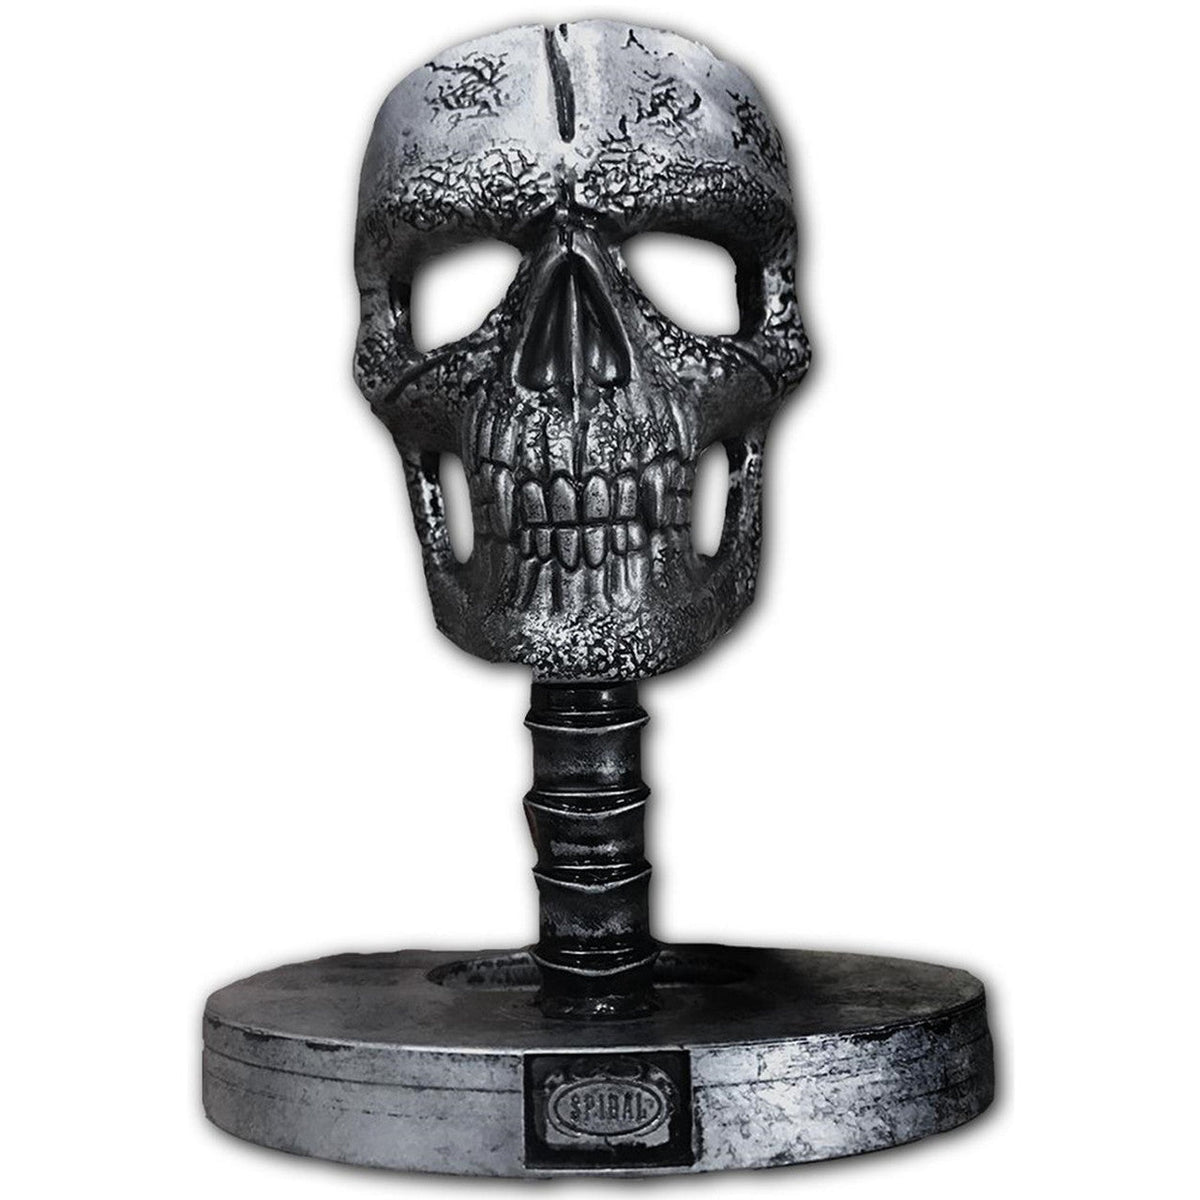 Wax Reaper Candle With Skull Sculpture-Candles-Scarlett Dawn